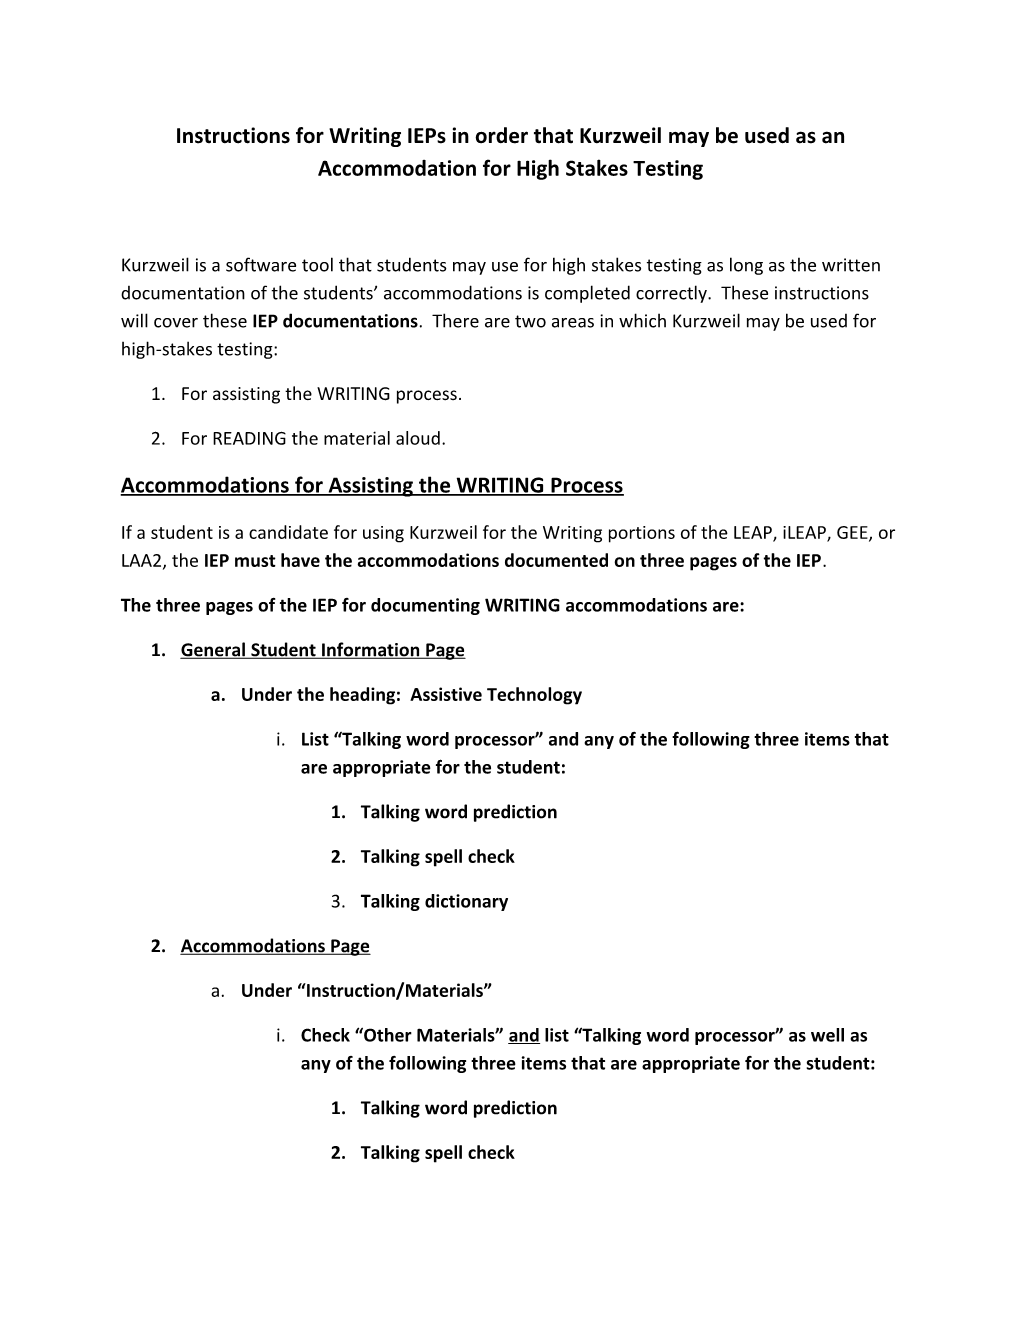 Accommodations for Assisting the WRITING Process